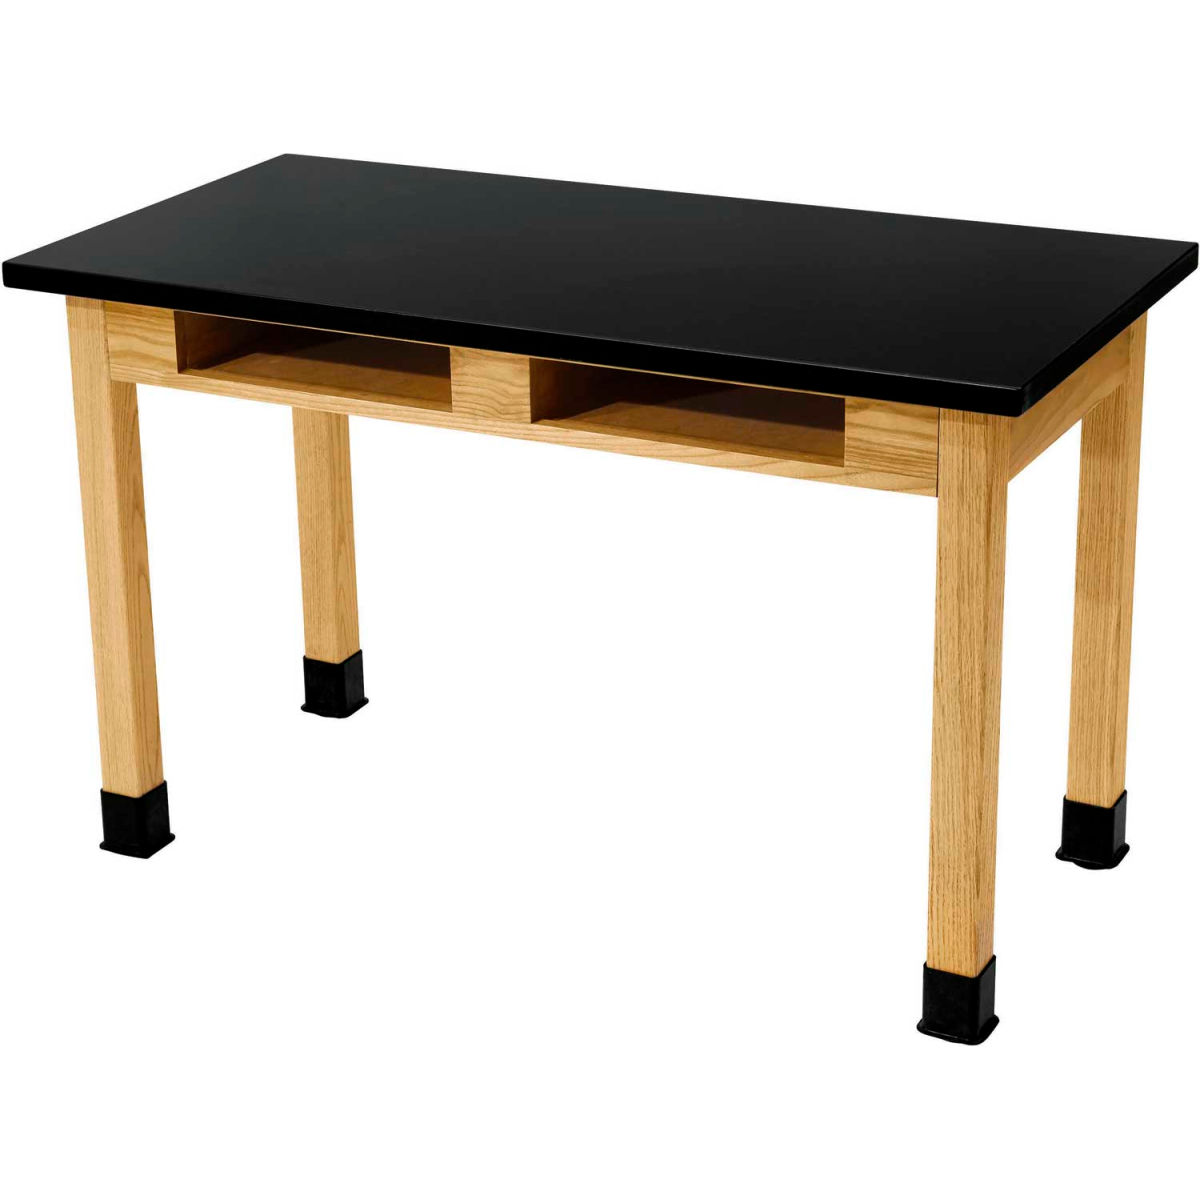 B1109970 Science Lab Table with Compartment & Chemical Resistant Top - Black with Oak Leg - 60 x 30 x 36 in -  National Public Seating